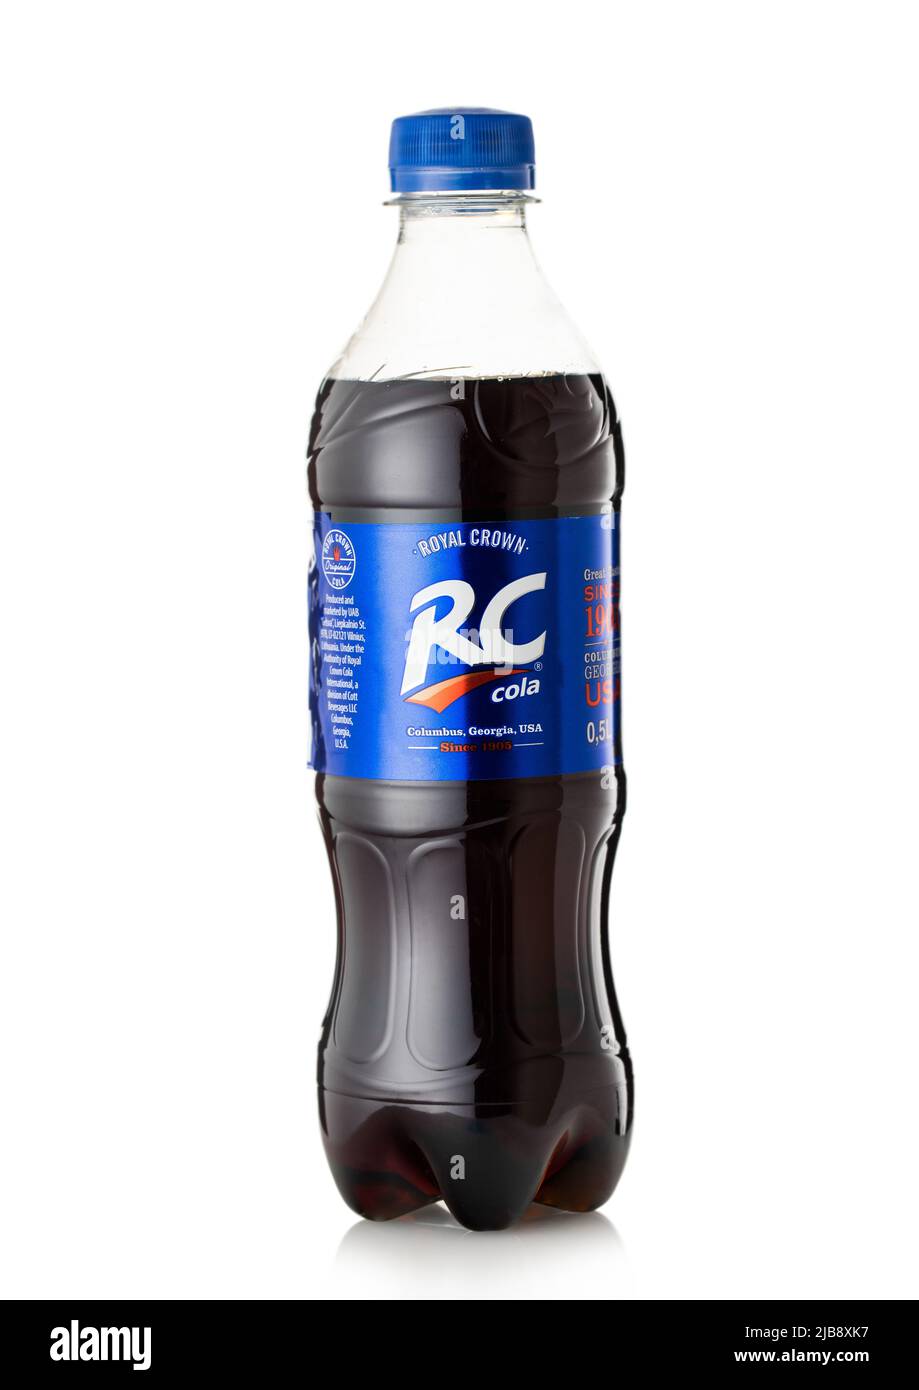 LONDON,UK - MAY 14, 2022: Bottle of RC cola soft drink on white background. Stock Photo